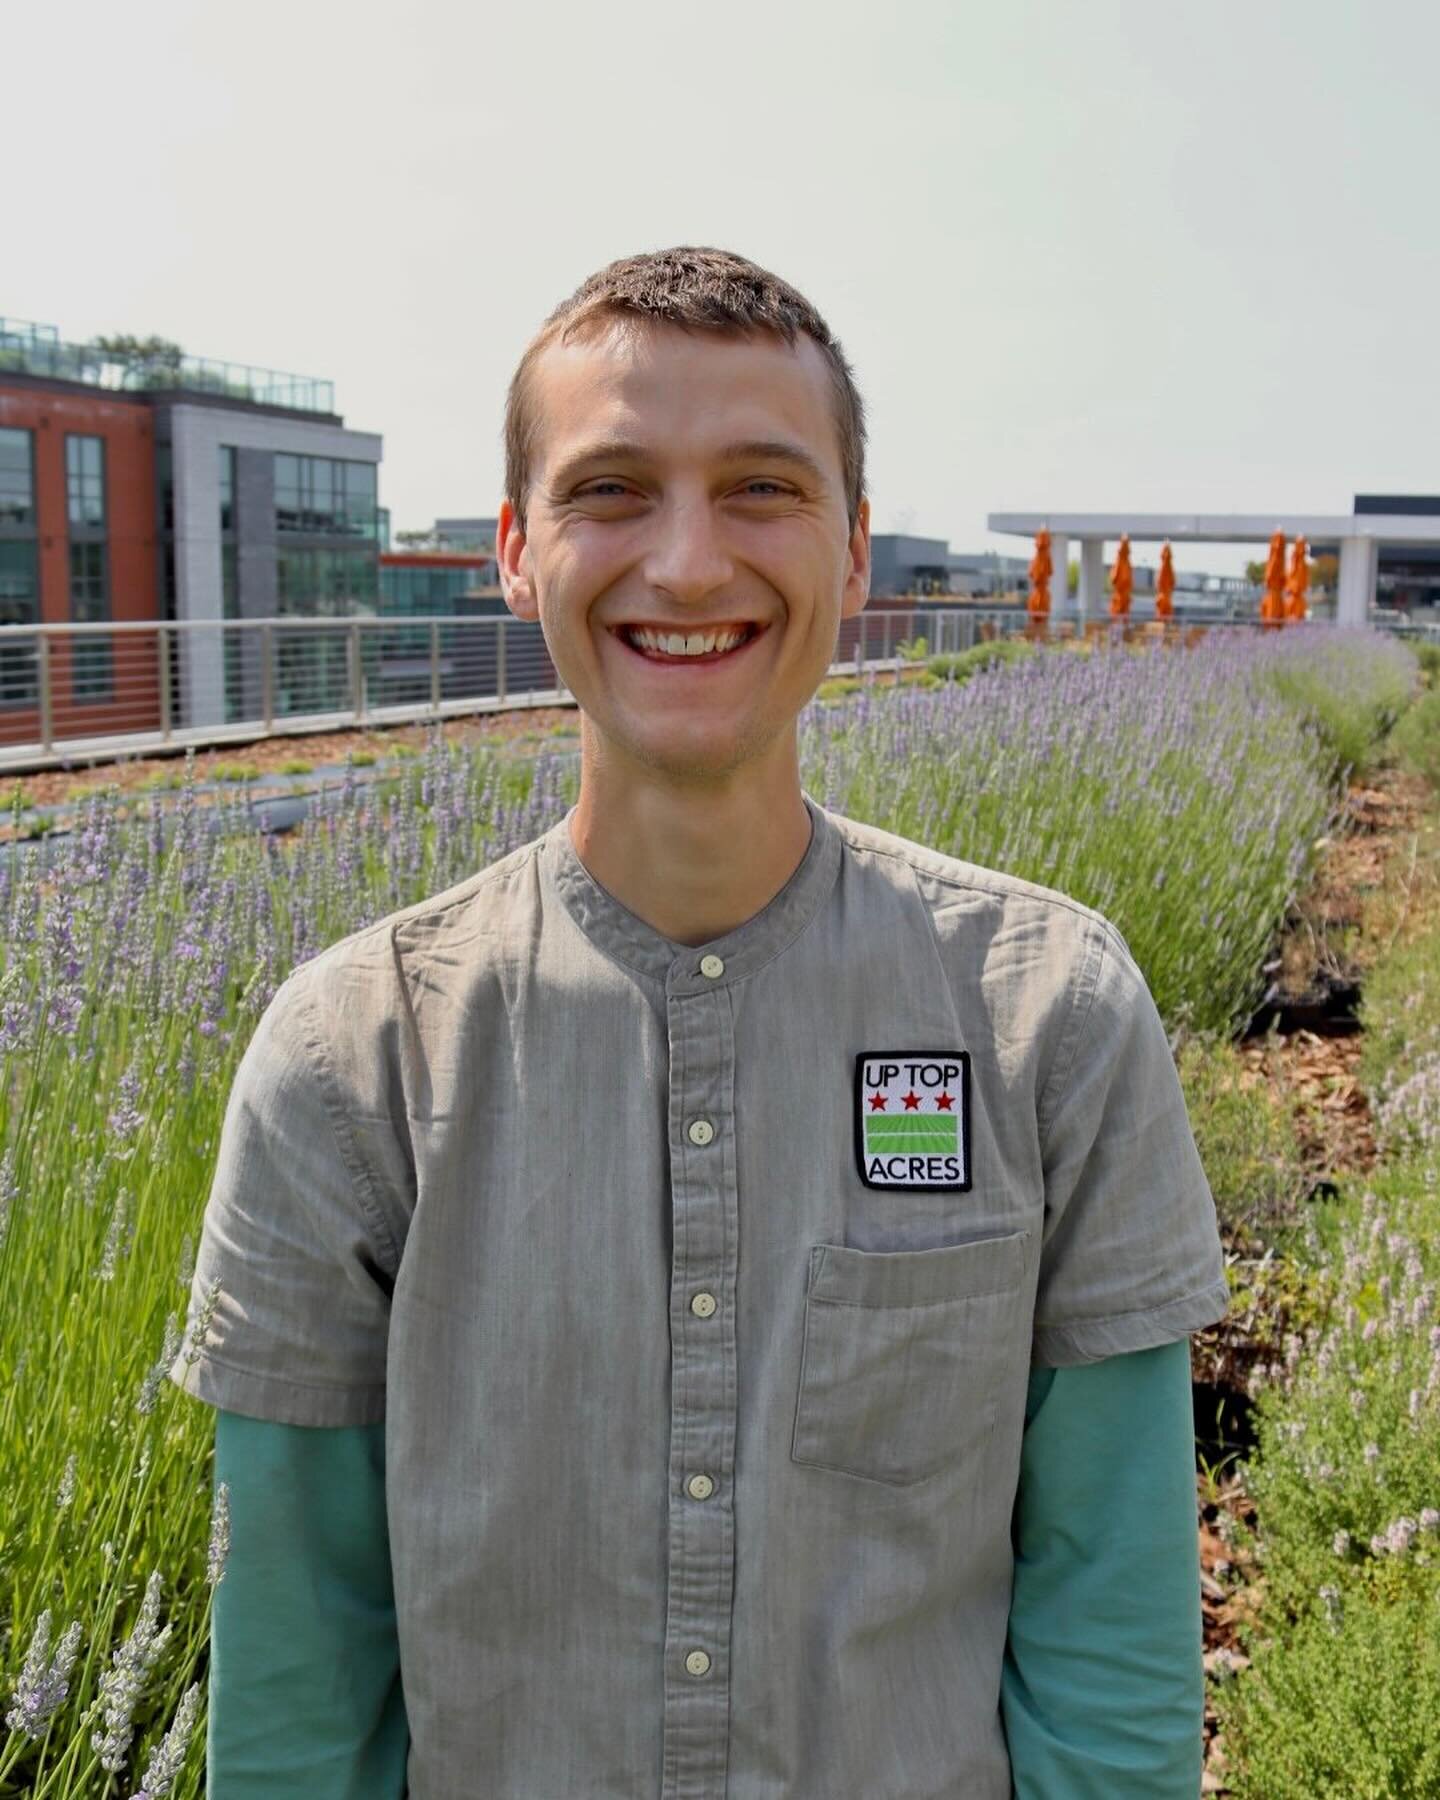 Meet the farmers! Up next is James, who joined the Up Top team last spring. He is relishing the upcoming radish season when he can make all kinds of fun things like pesto and taco toppings. He likes to admire the many pollinator and bird species that